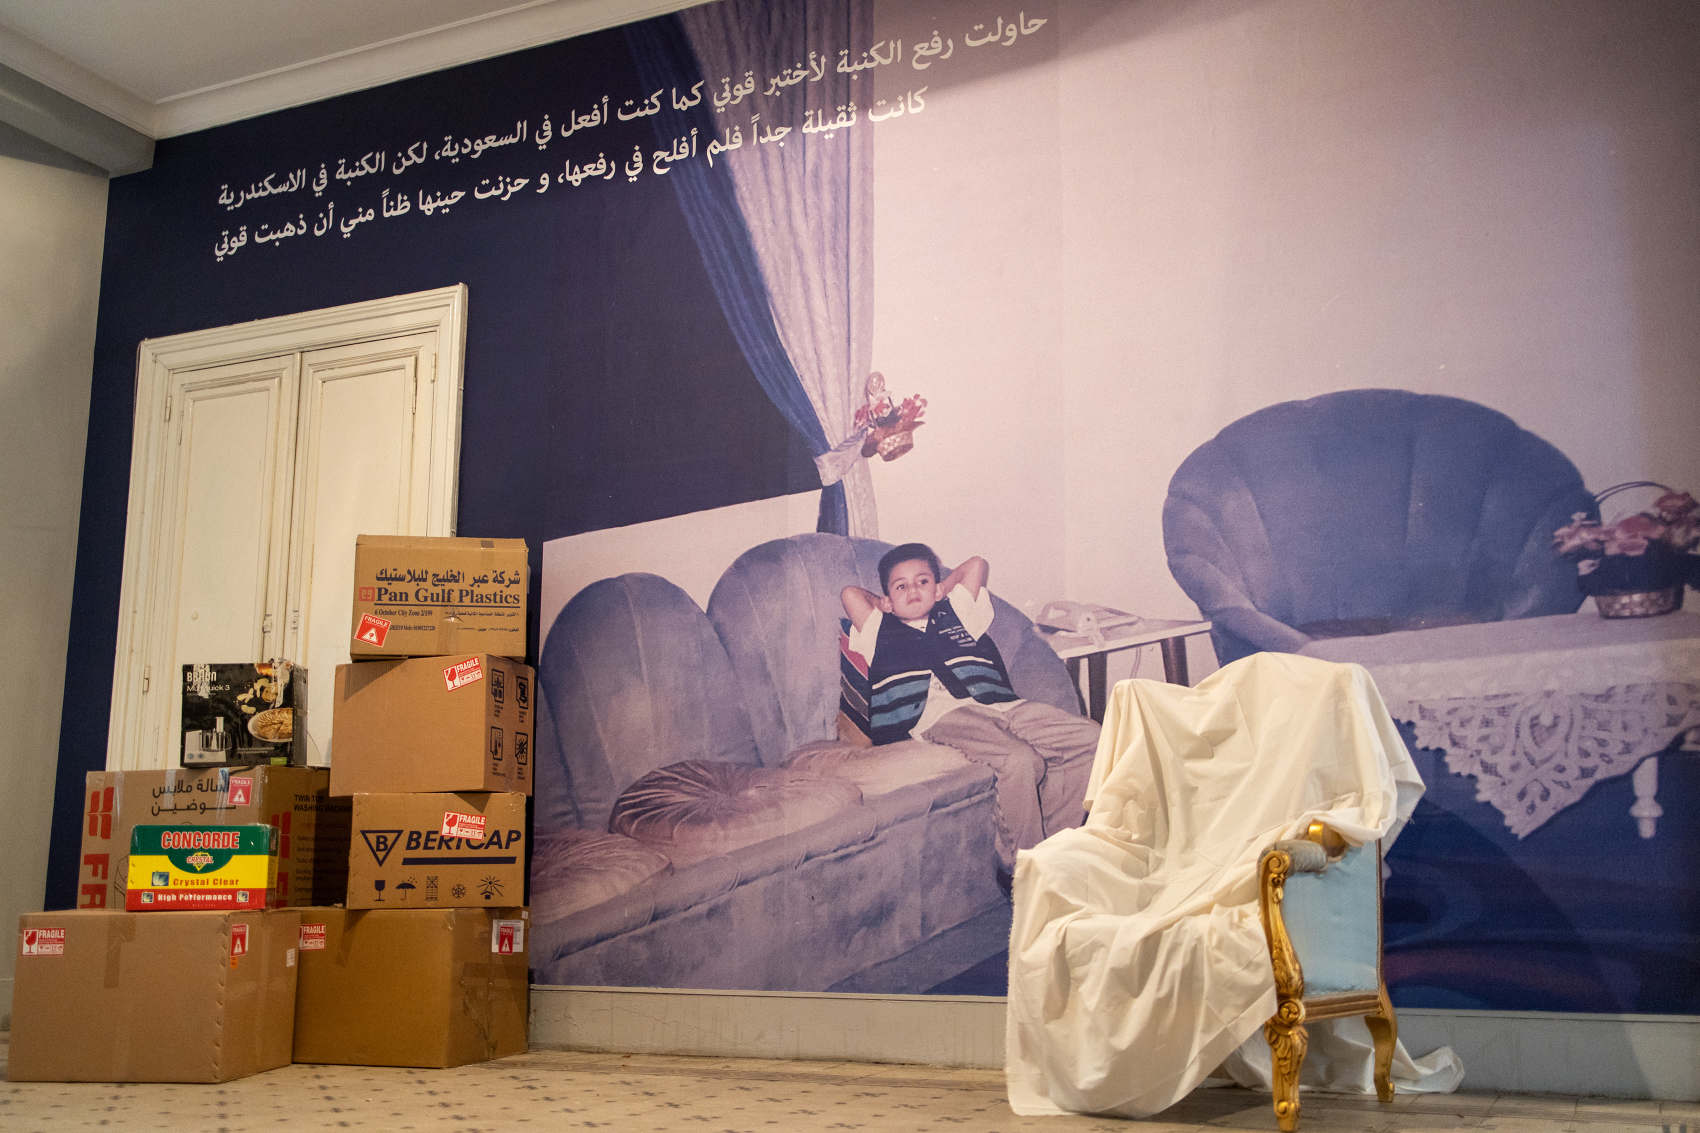 Figure 5: Lina El-Shamy’s installation “Deferred Homes and Boxed Objects: From the Gulf to Egypt.” On the wall, in Arabic: “I tried to lift the sofa to test my strength as I used to do in Saudi Arabia, but the sofa in Alexandria was too heavy and I was not able to lift it, and I felt sad, then, thinking that my strength was gone.”